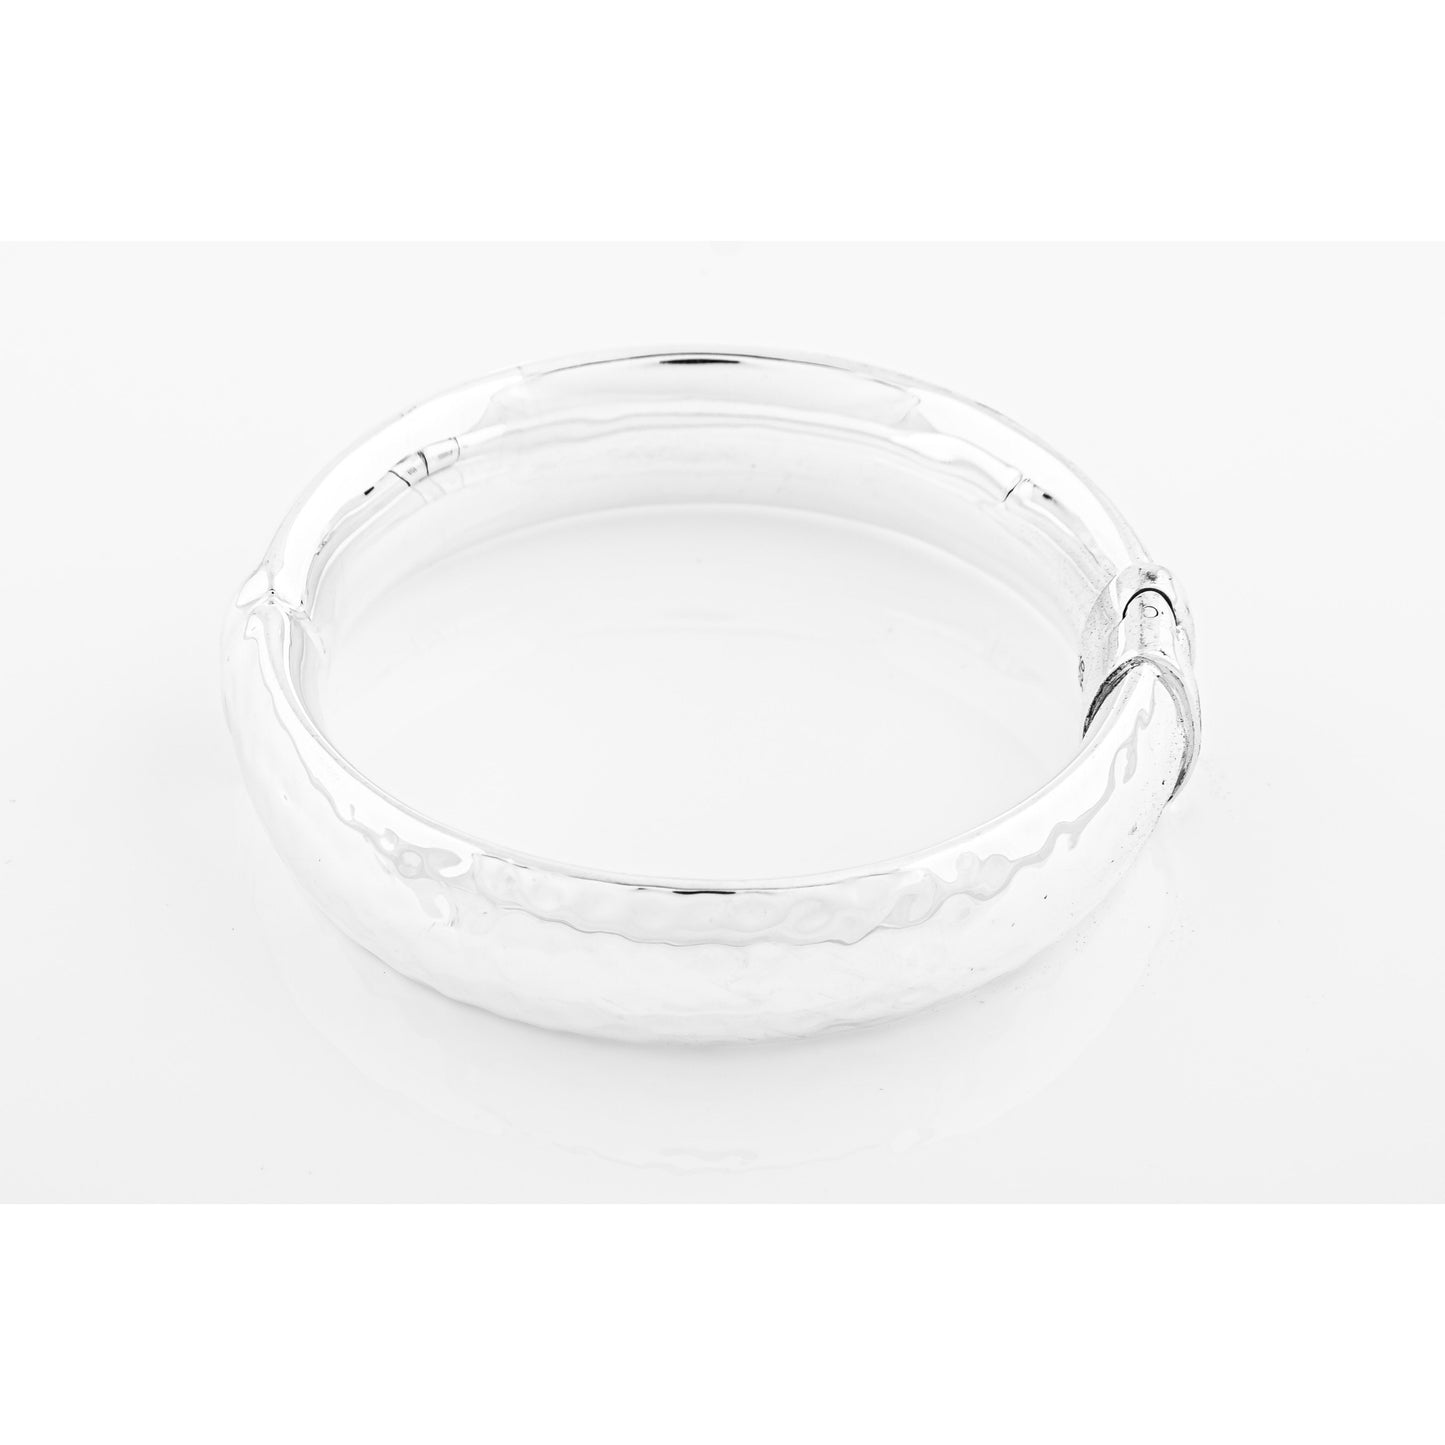 Clear glass ashtray on white.